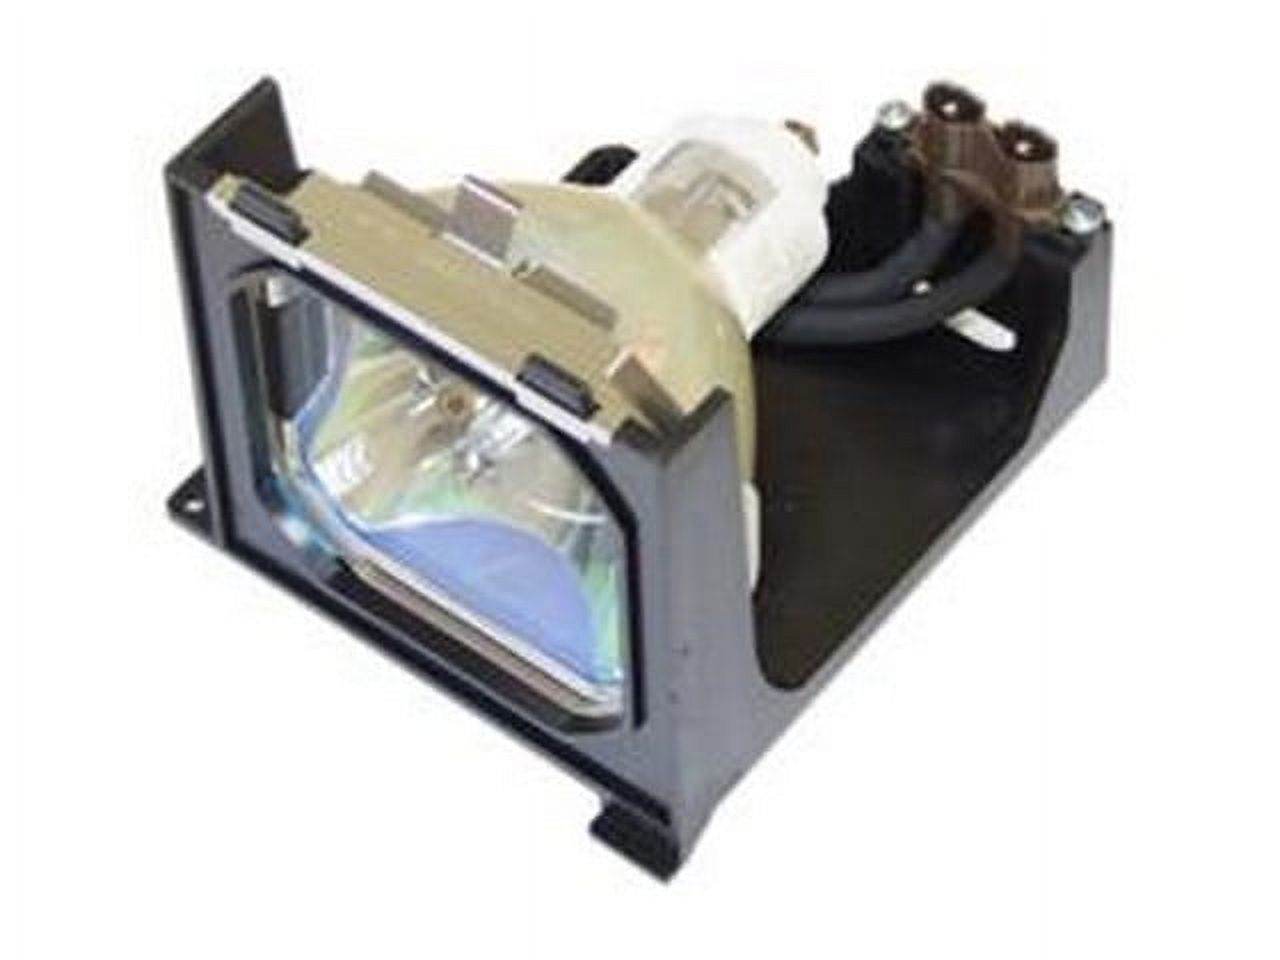 Sanyo POA-LMP68 Projector Housing with Genuine Original OEM Bulb - image 1 of 1